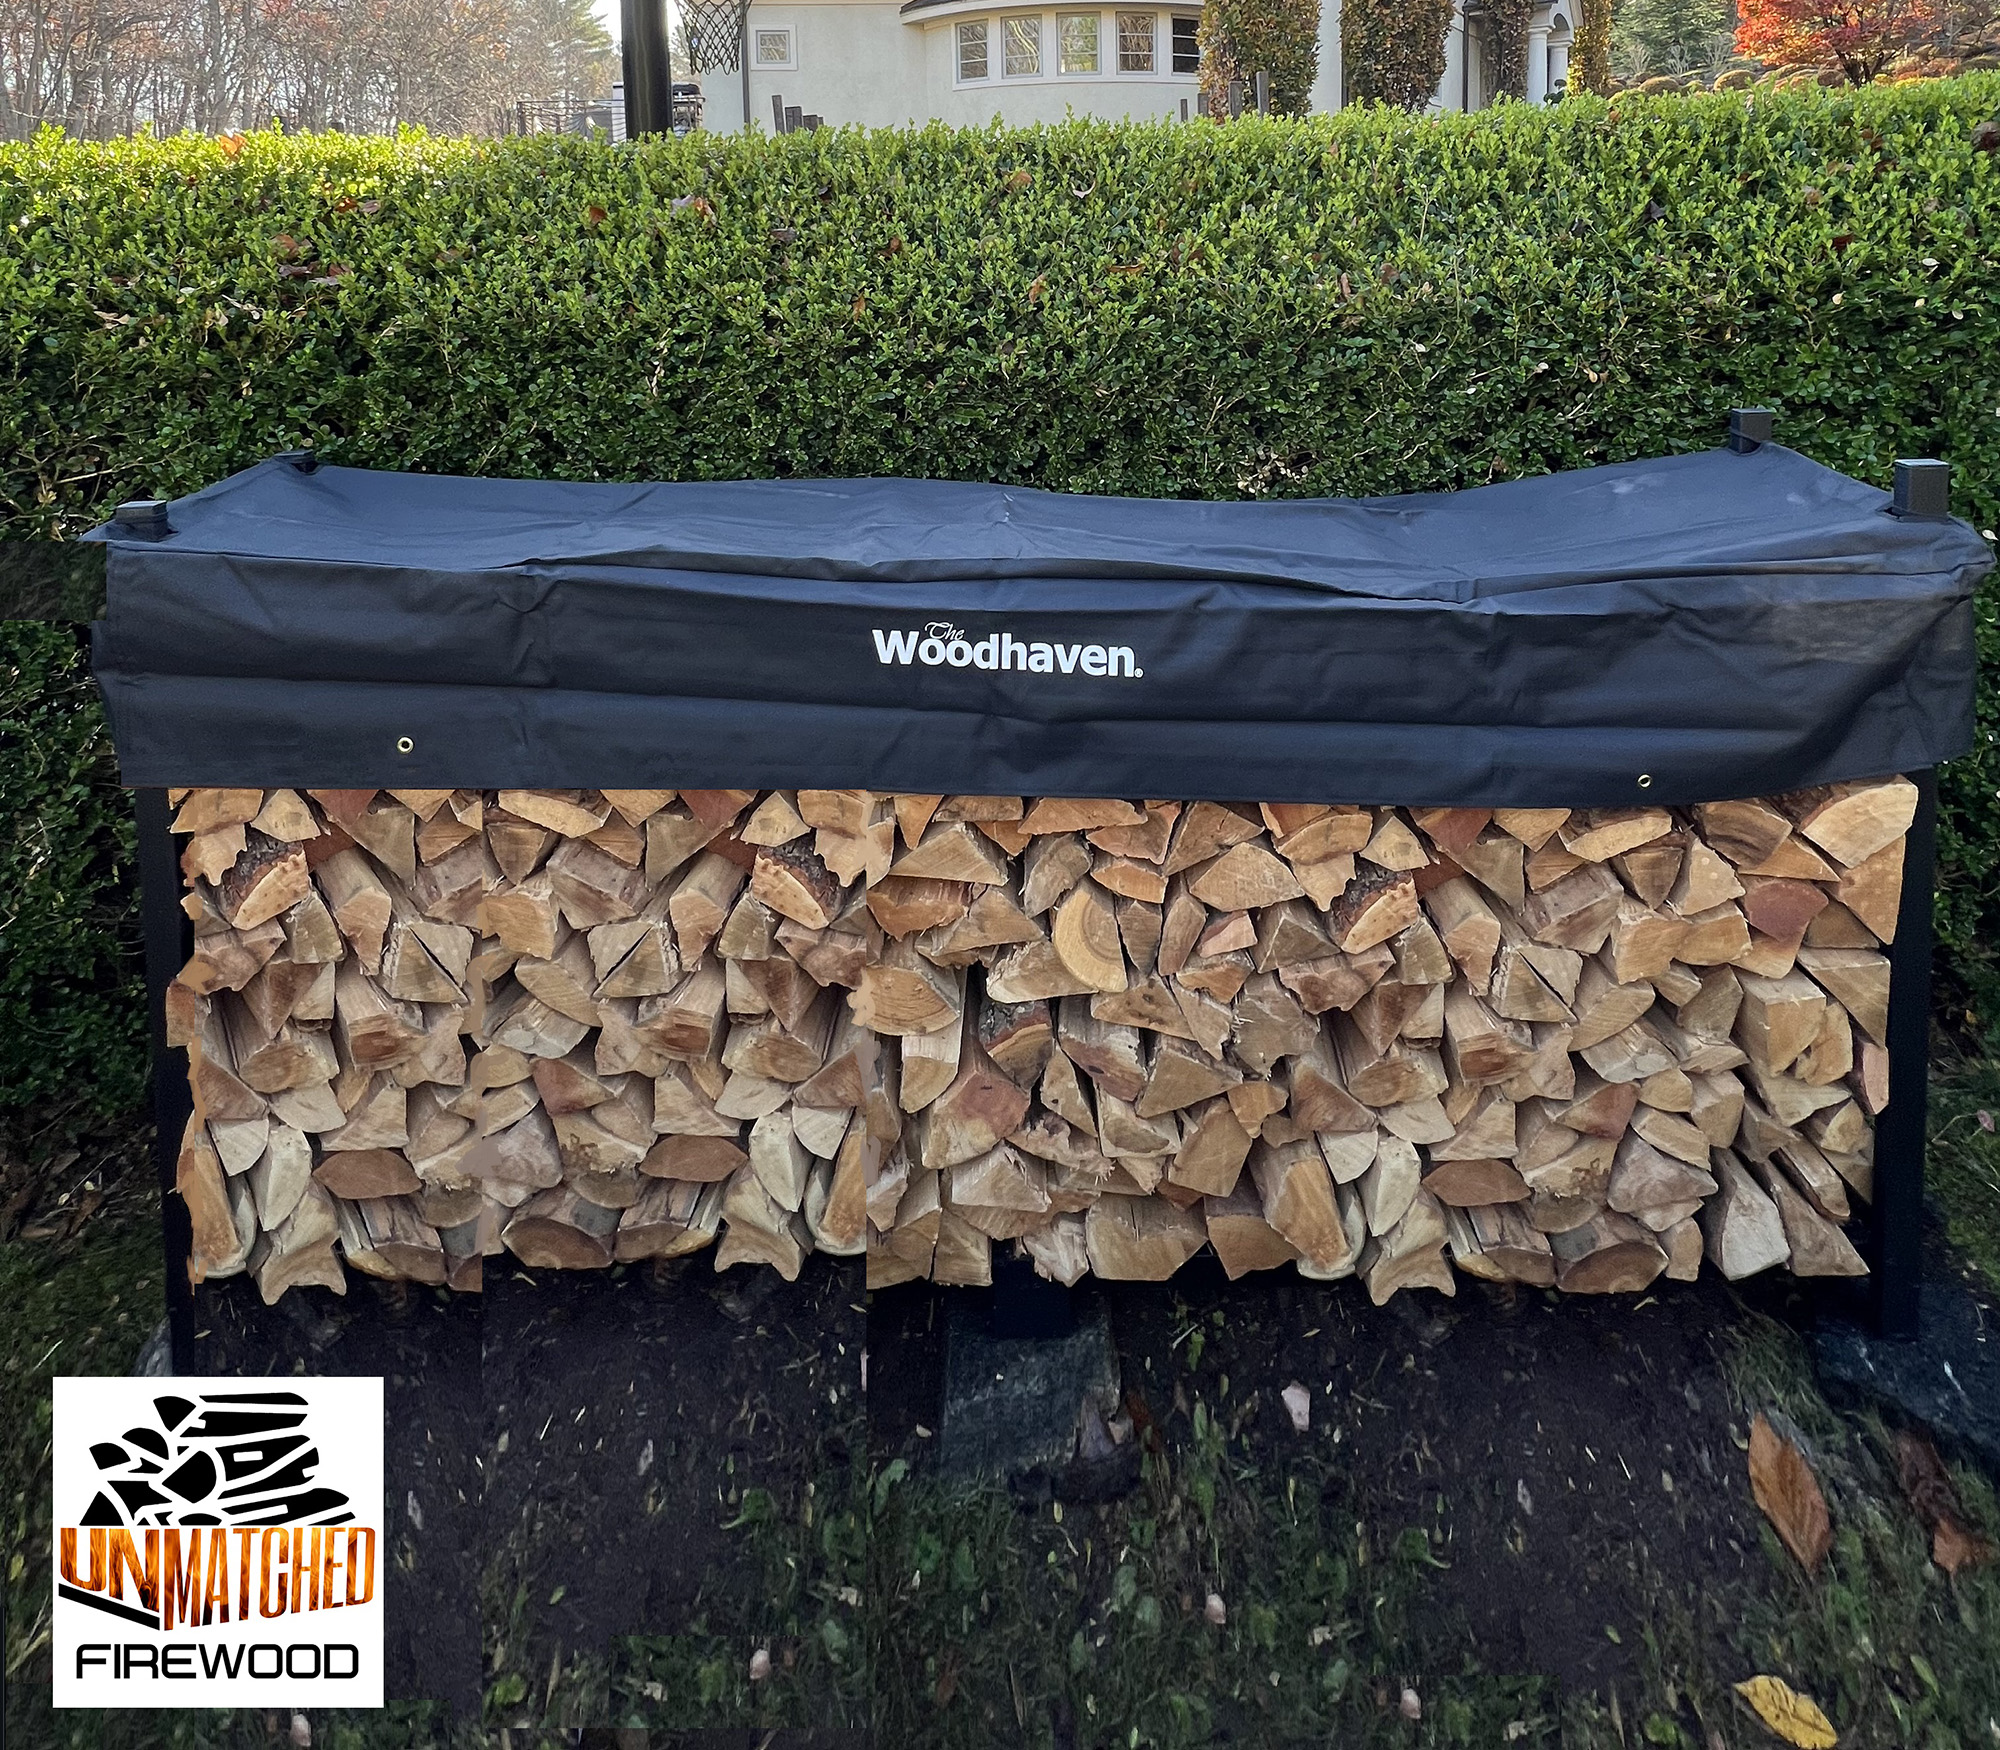 Unmatched Firewood: White Plains Firewood